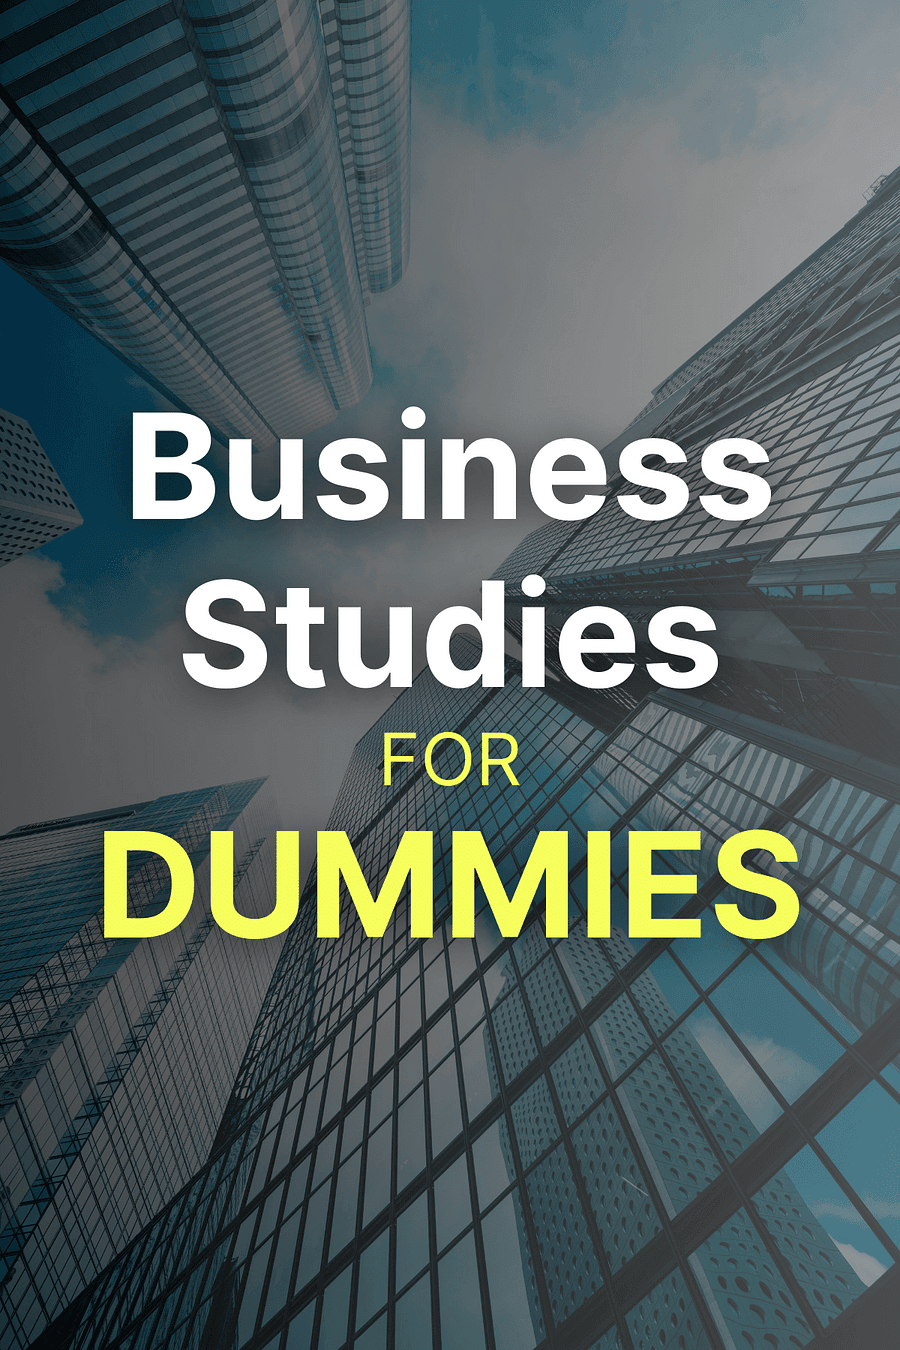 Business Studies For Dummies by Richard Pettinger - Book Summary